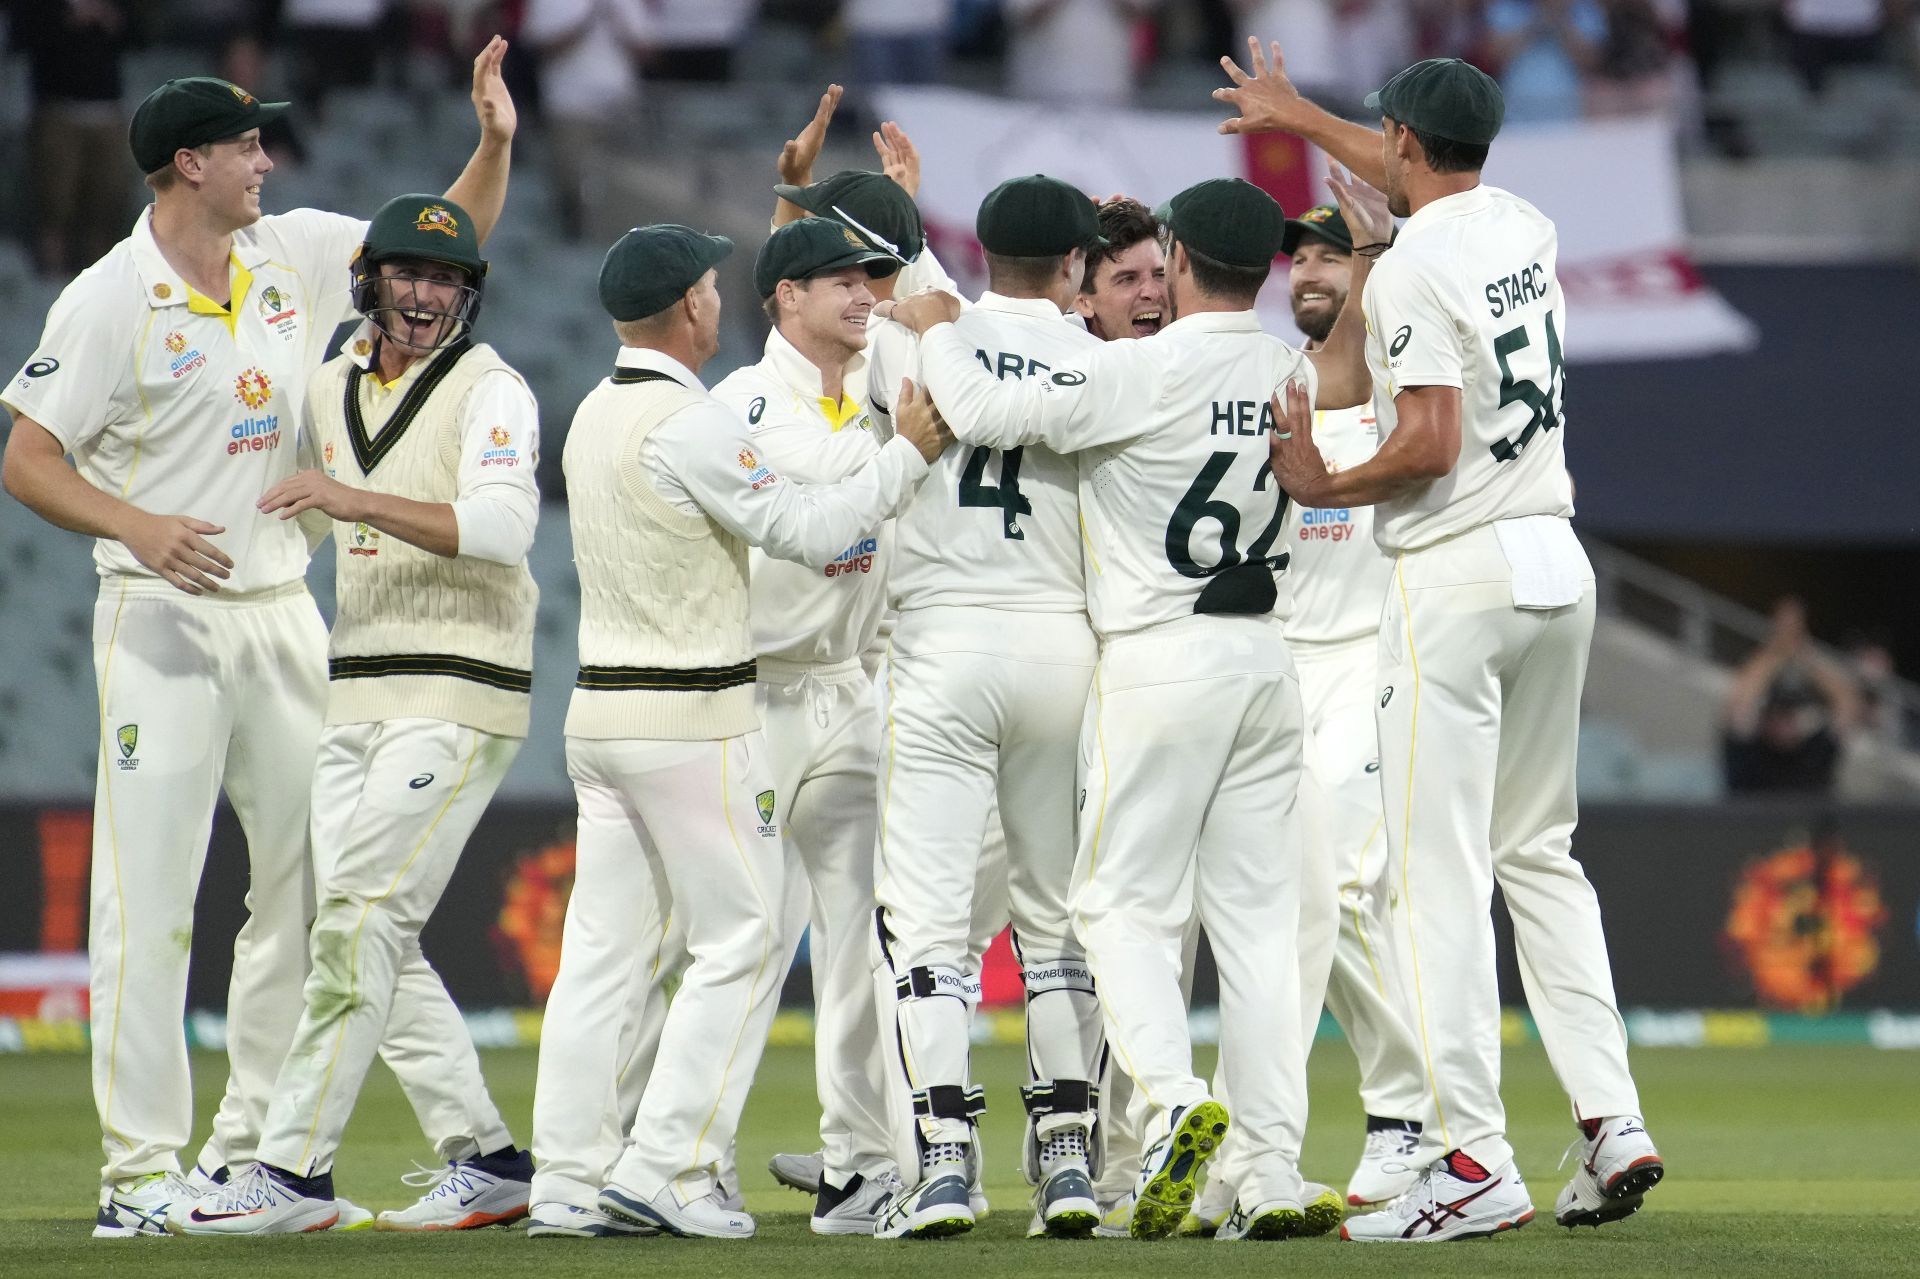 A draw in the Boxing Day Test will see Australia retain the Ashes